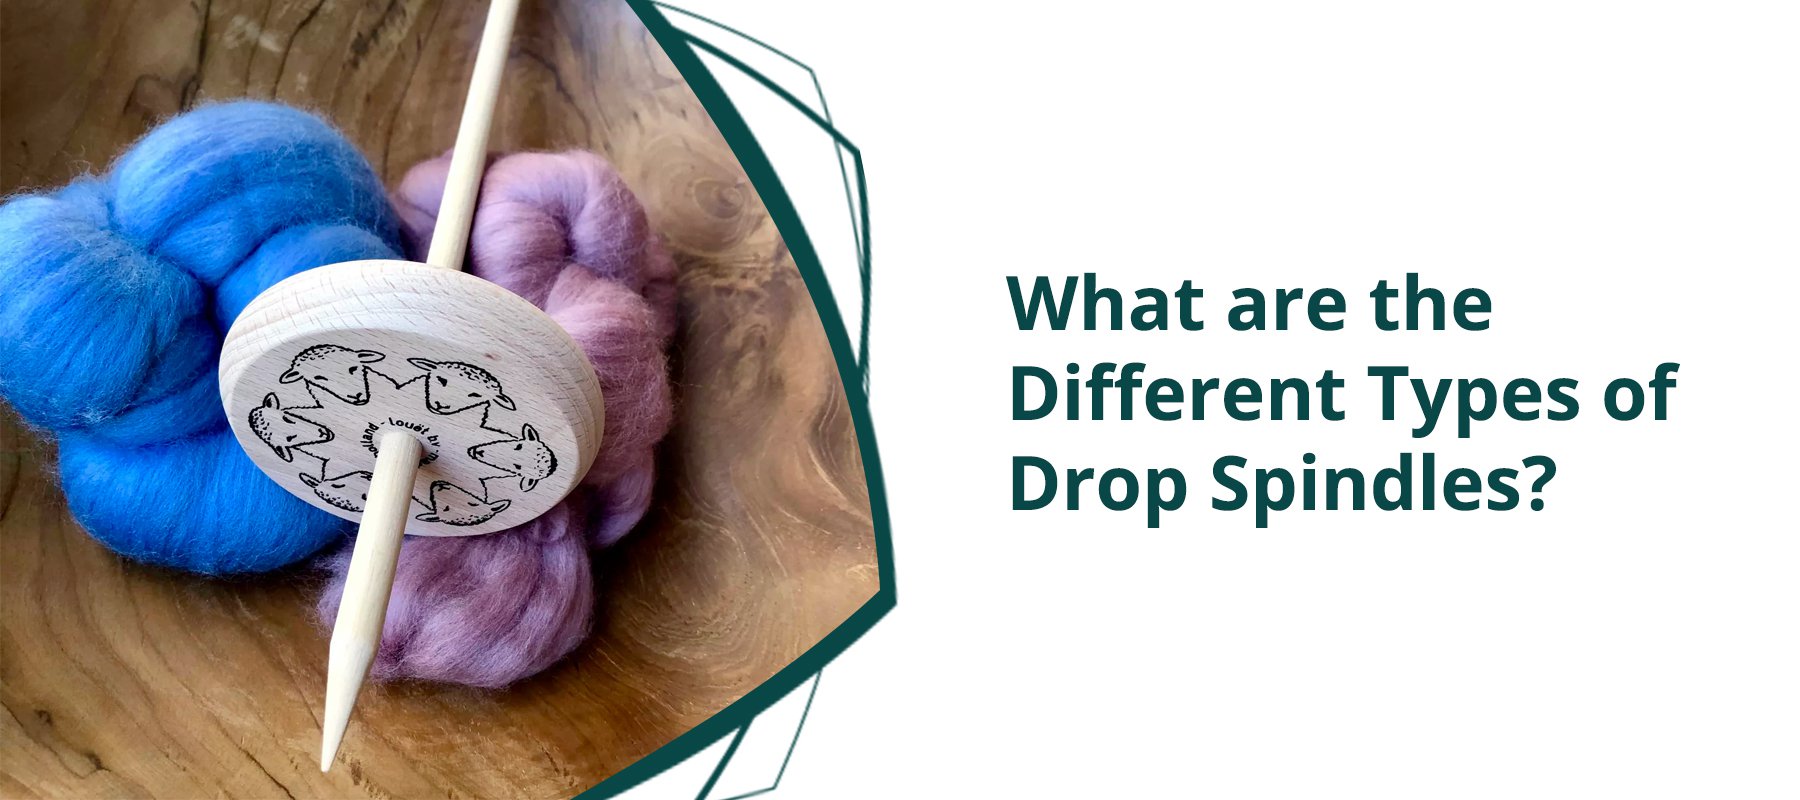 What are the Different Types of Drop Spindles?